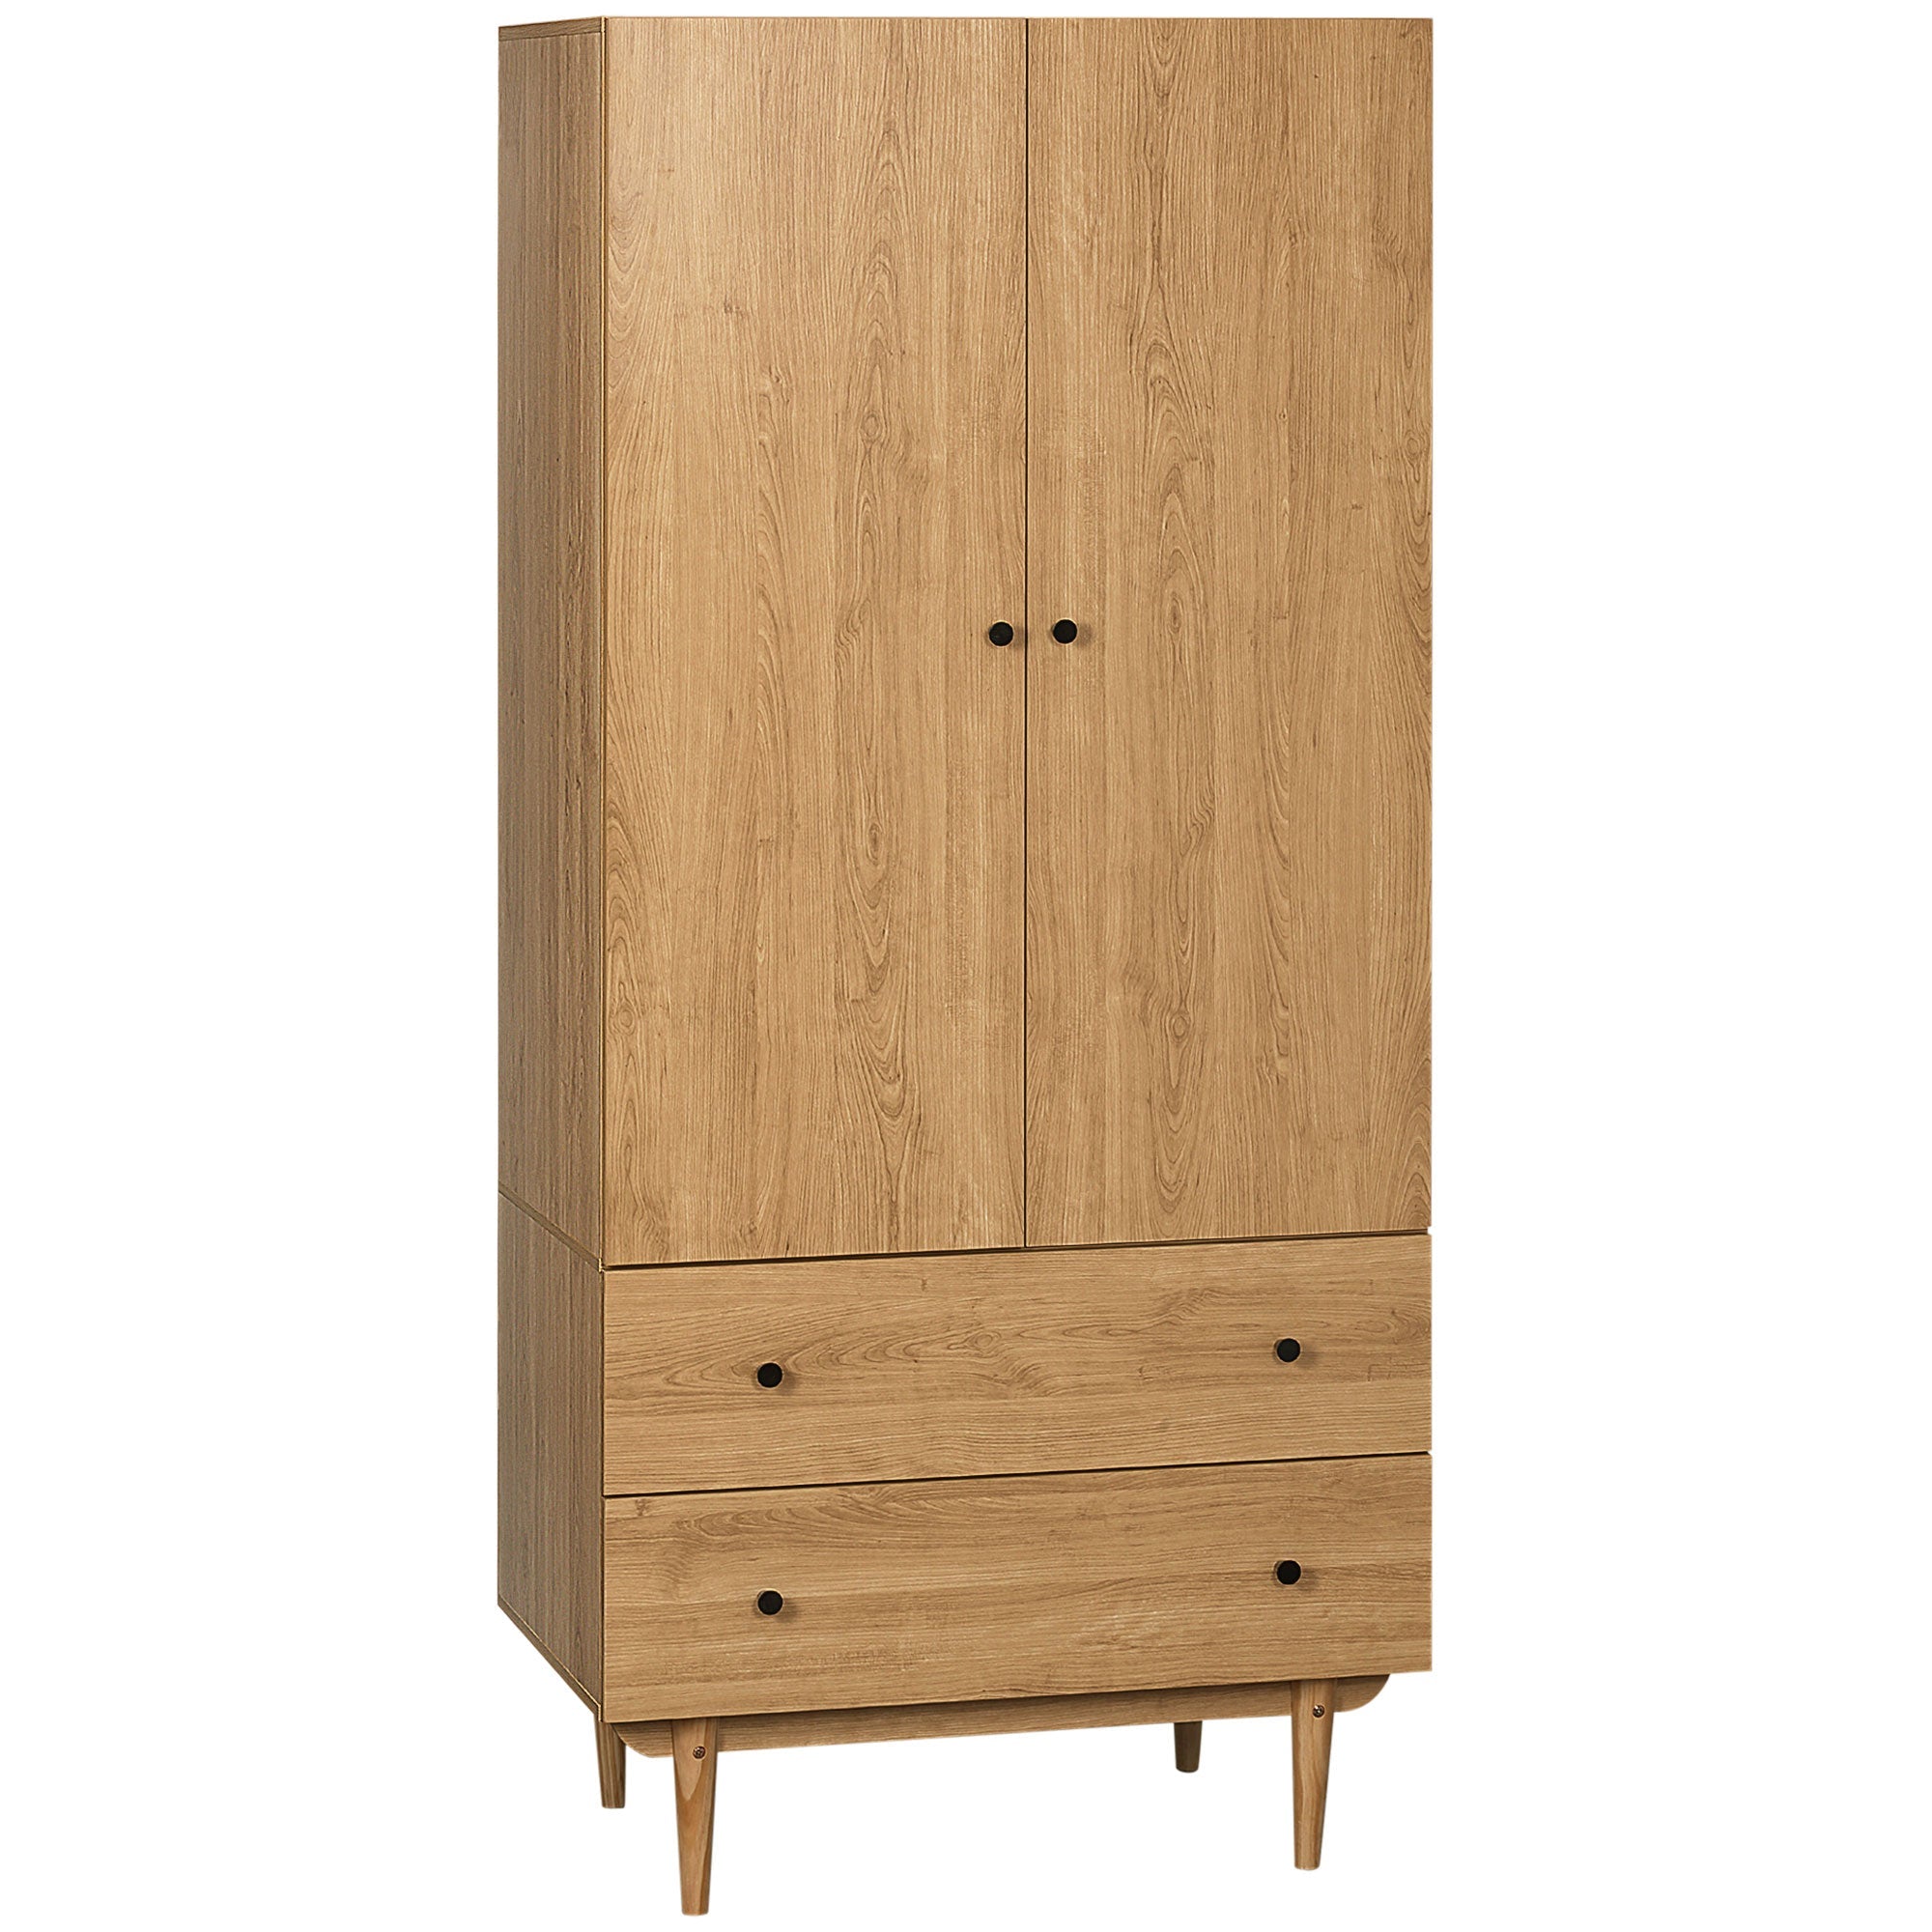 Wardrobe with 2 Doors, 2 Drawers, Hanging Rail for Bedroom Clothes Storage Organiser, 80x52x180cm, Natural Tone-0